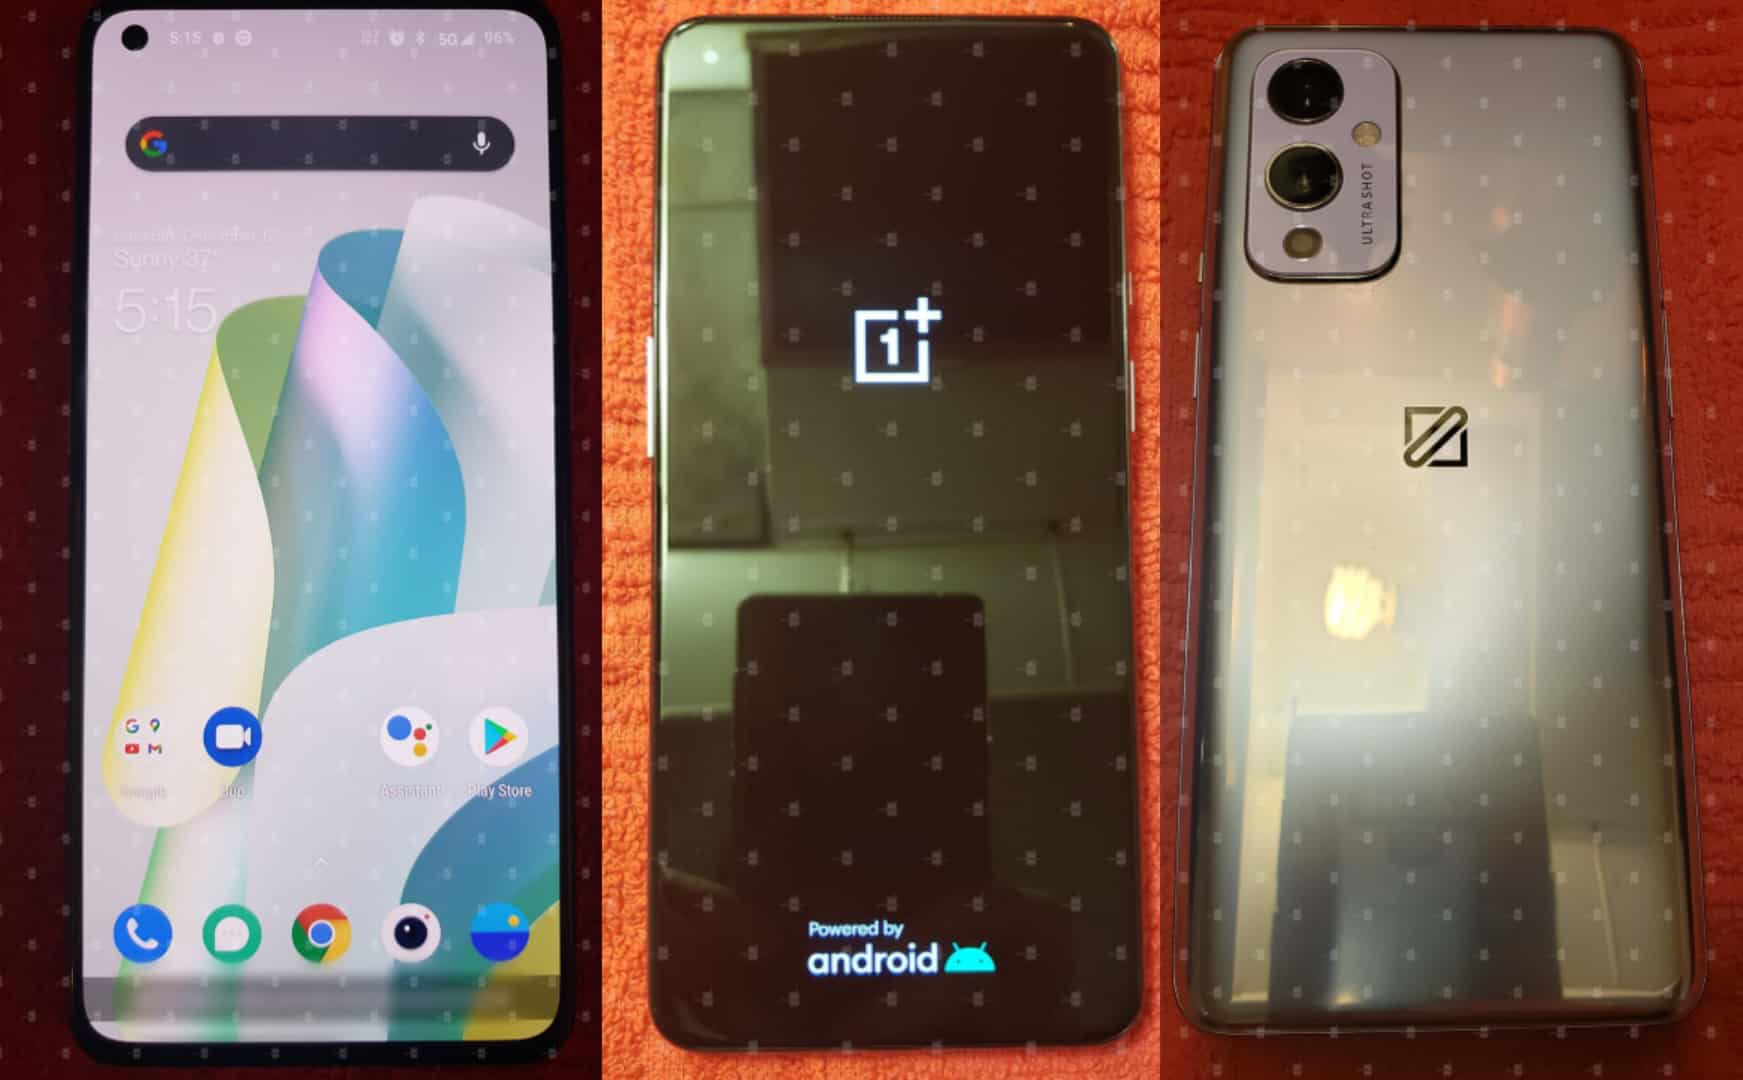 OnePlus 9 Leak Reveals The Phone's New Design, Confirms Snapdragon 888 [Images]